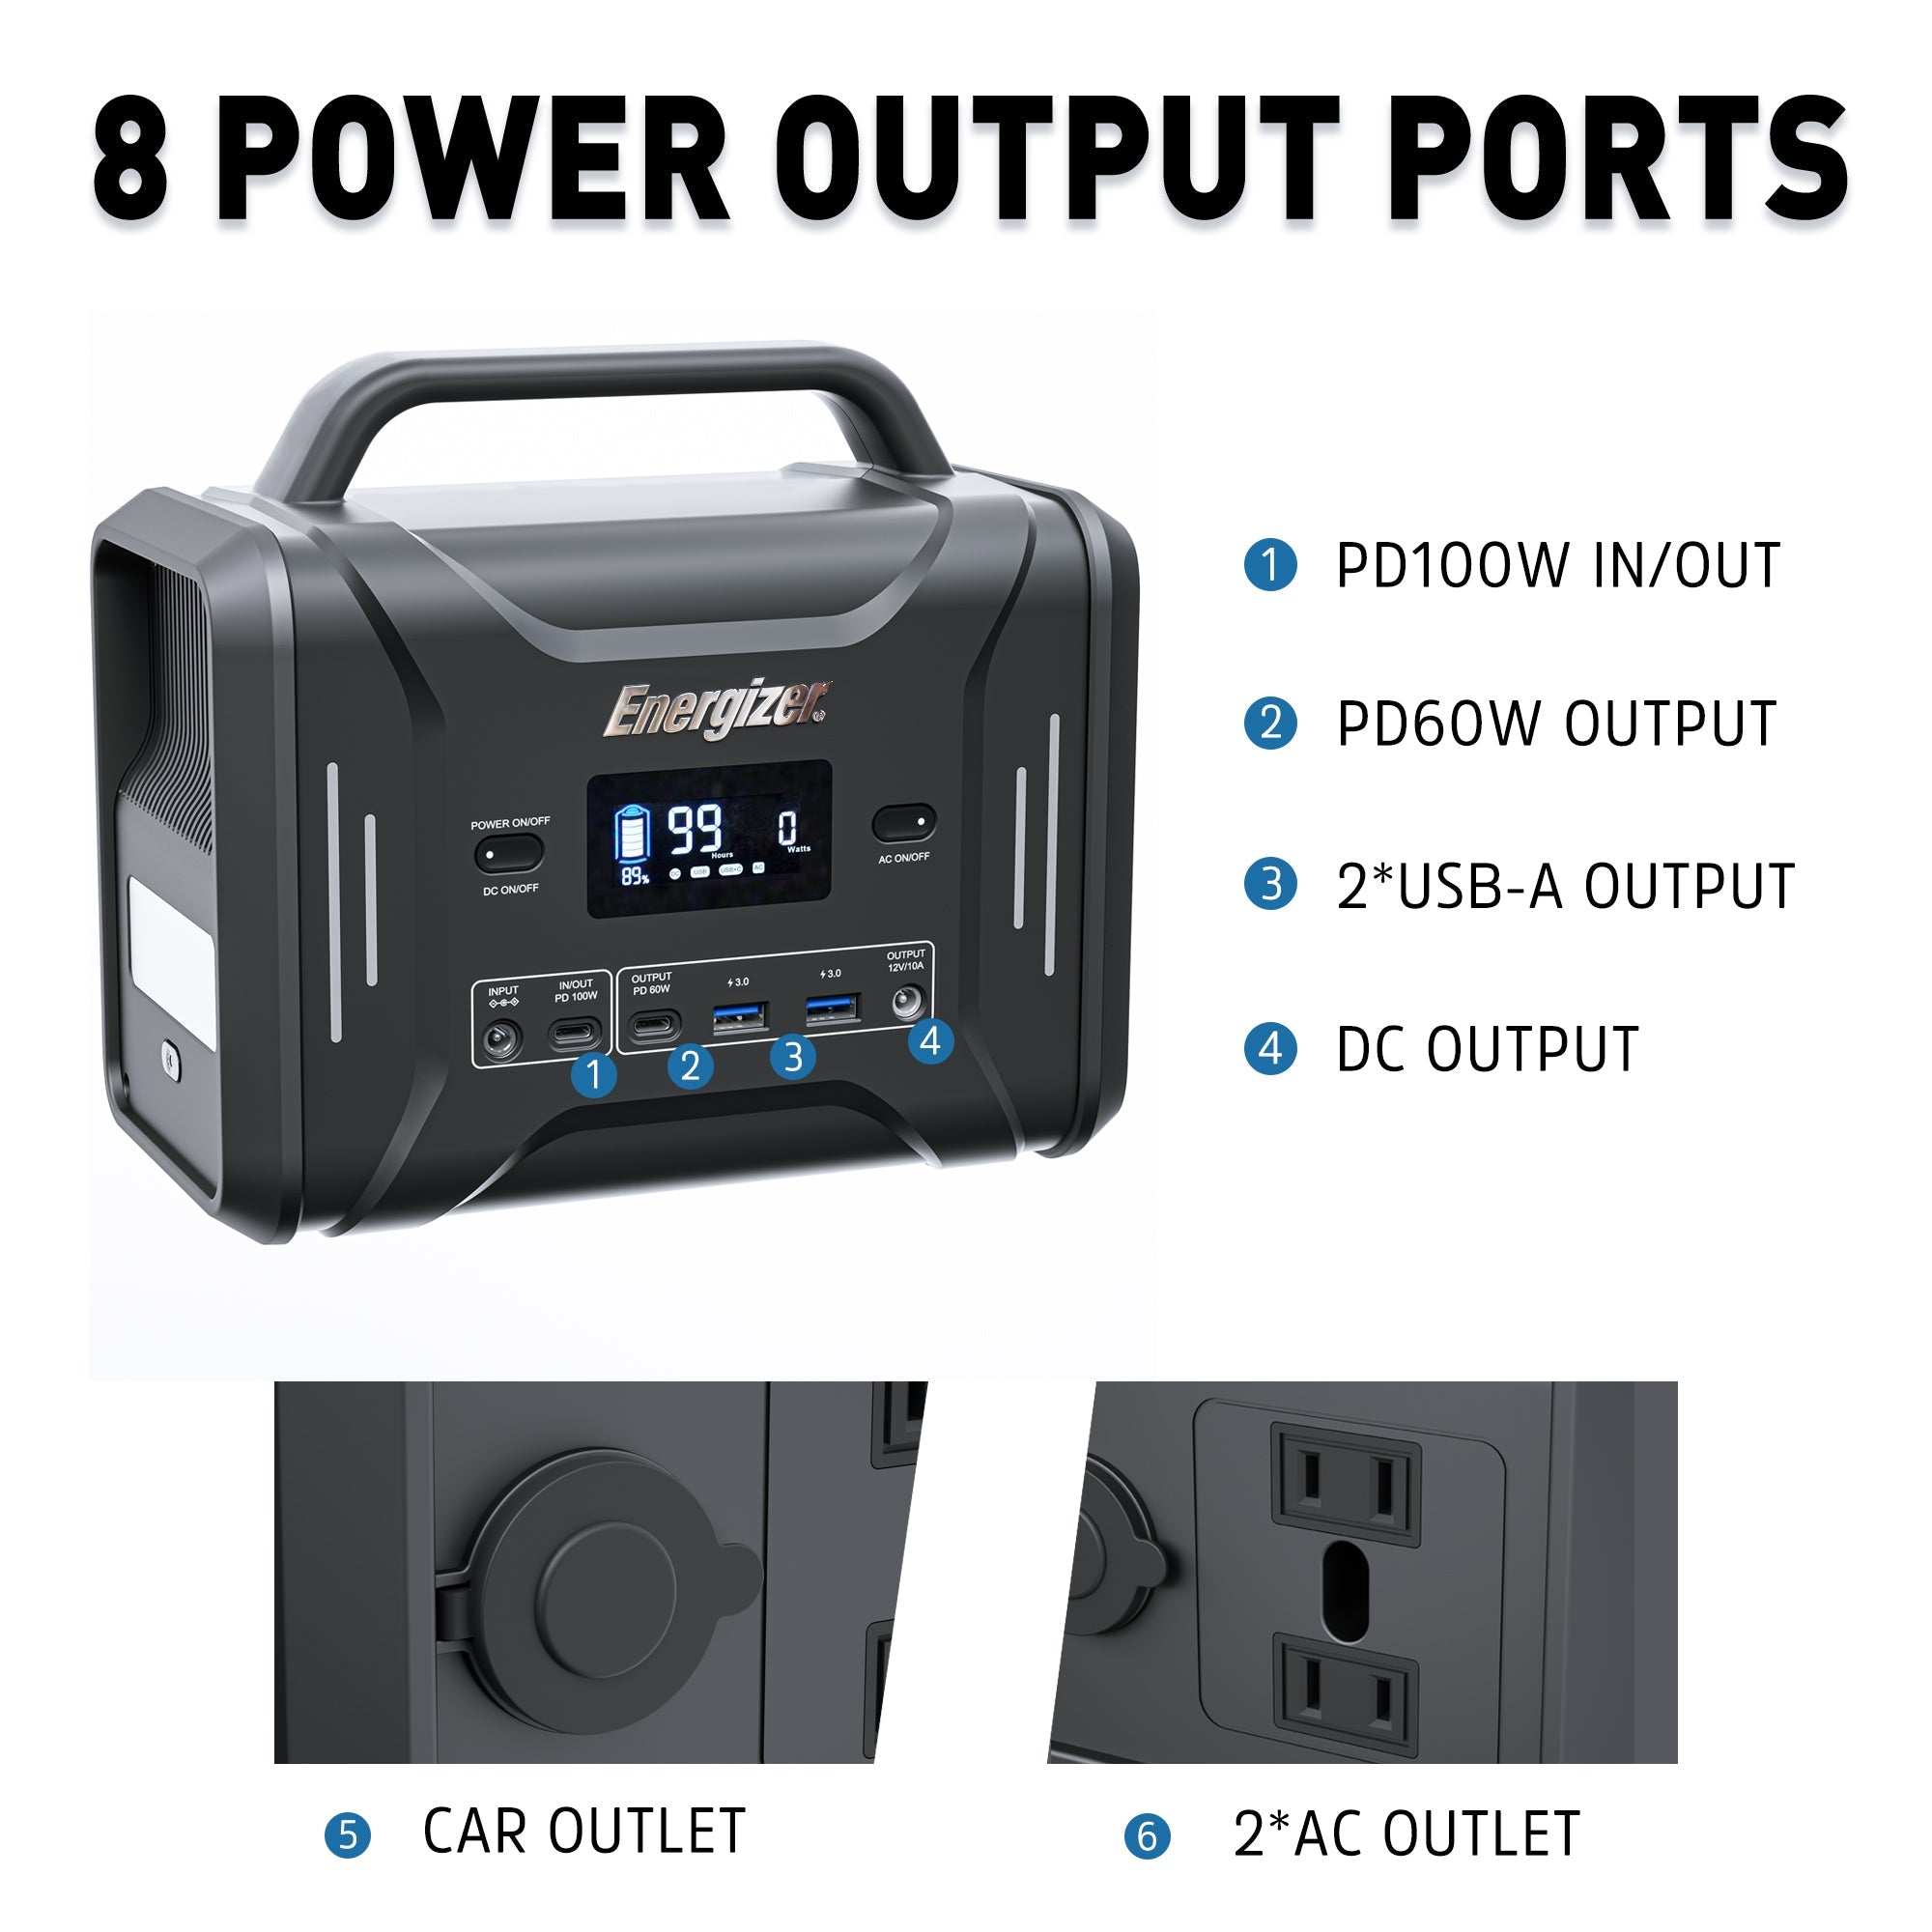 Energizer PPS320 with 8 power output ports